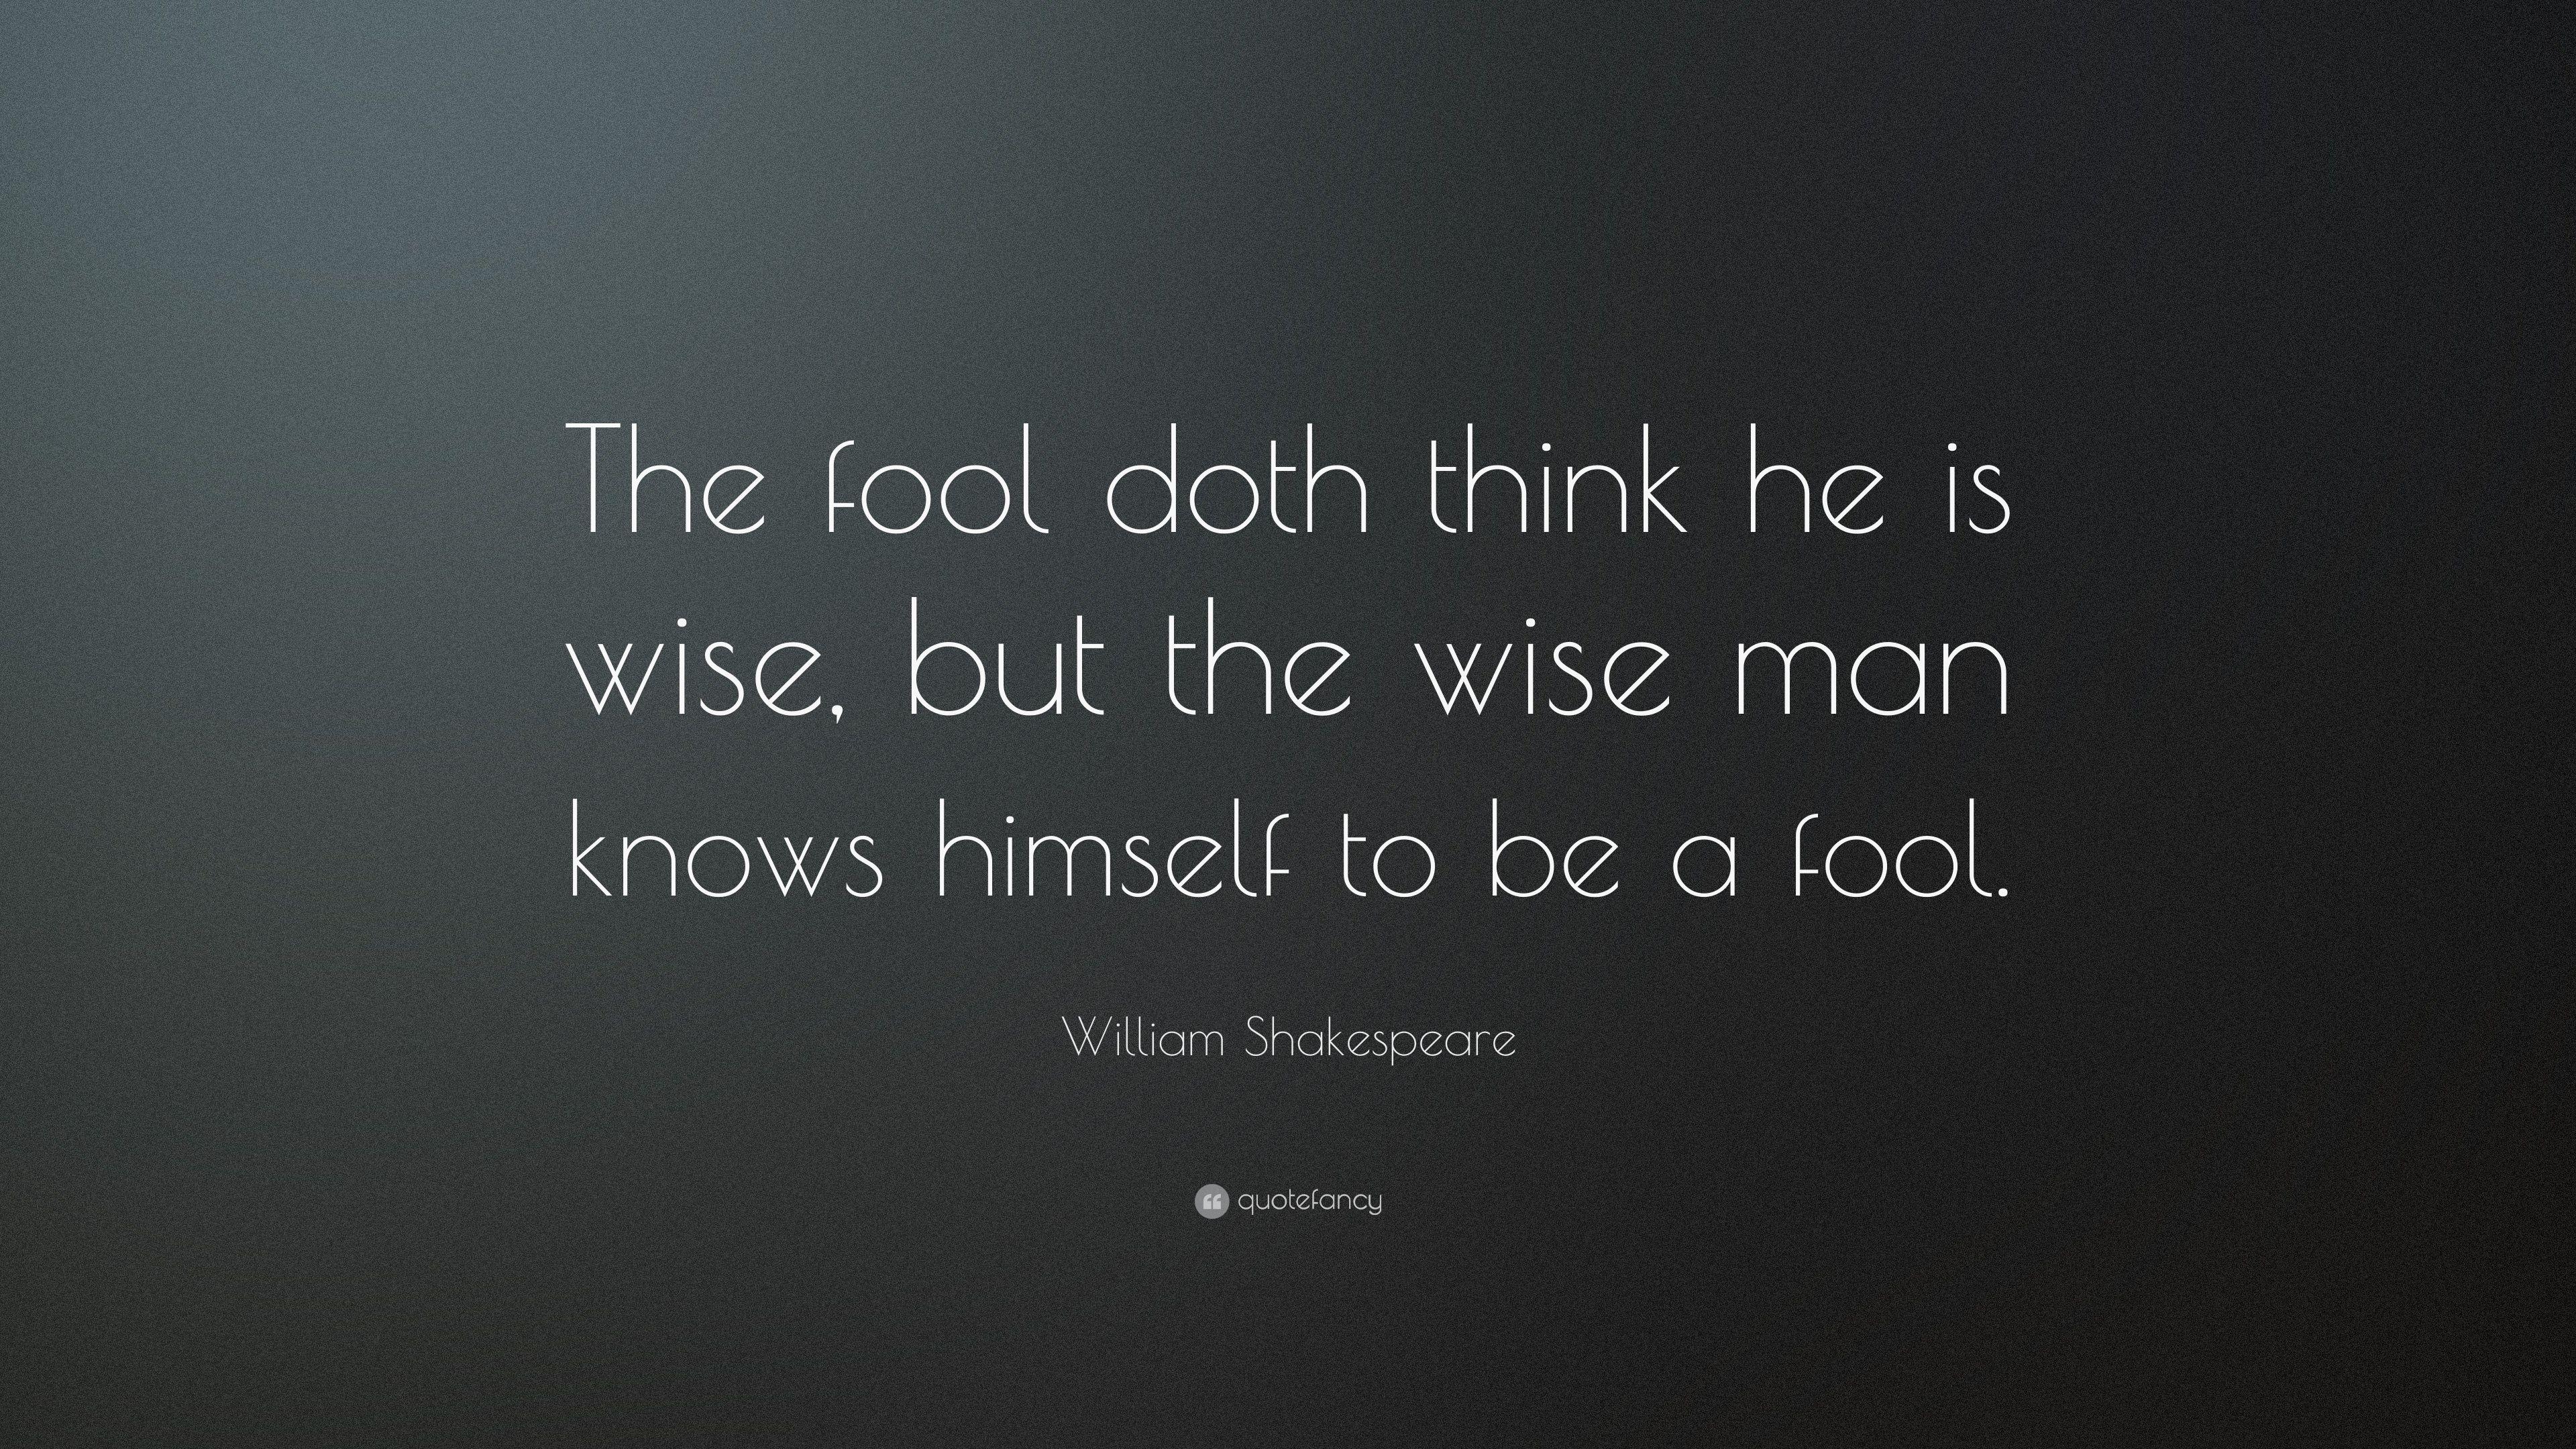 William Shakespeare Quote: “The fool doth think he is wise, but